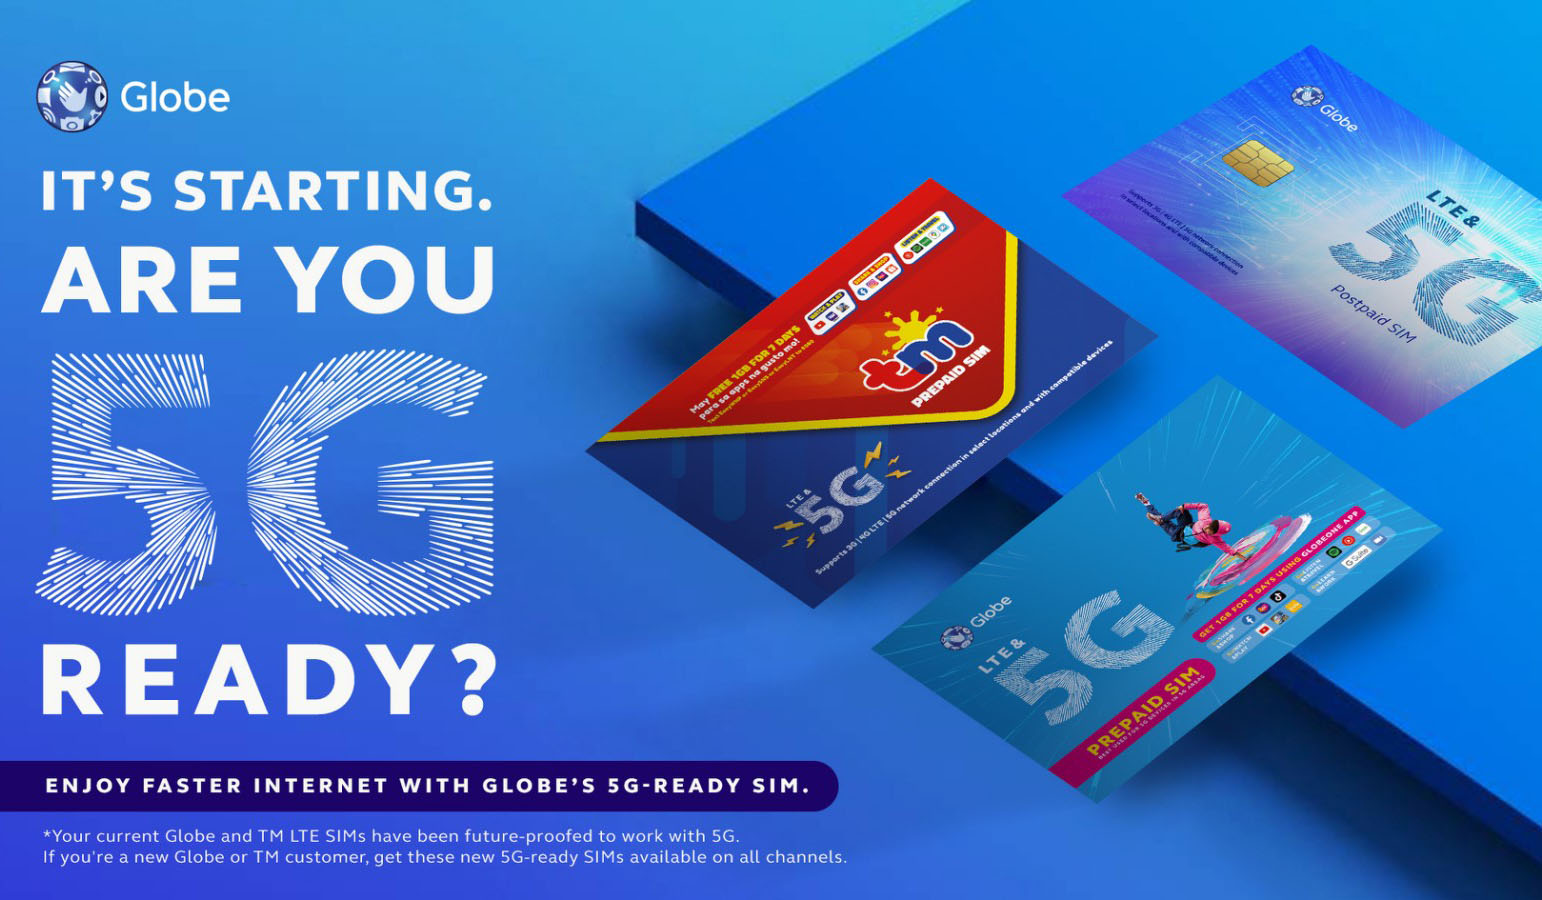 Globe’s 5G-ready sims now available!